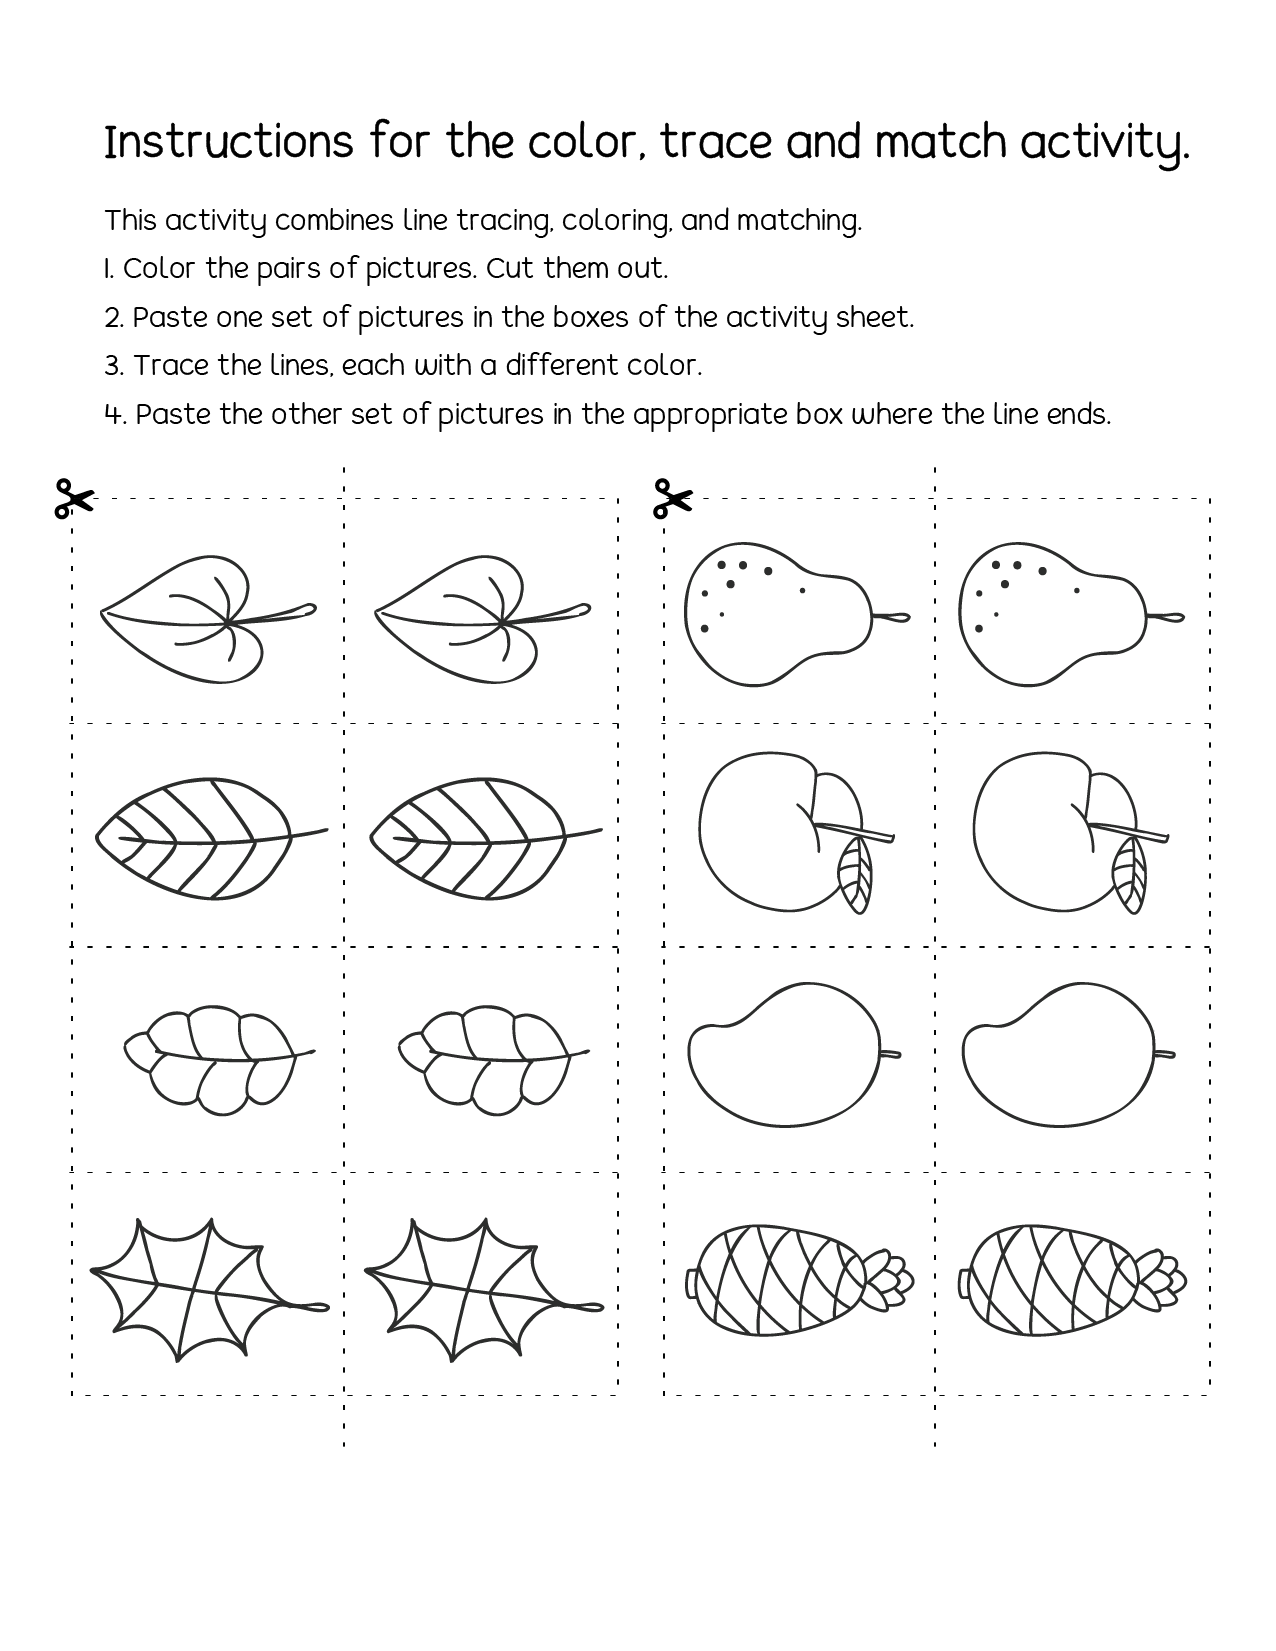 Line tracing, coloring and matching activity sheets for 3 year olds